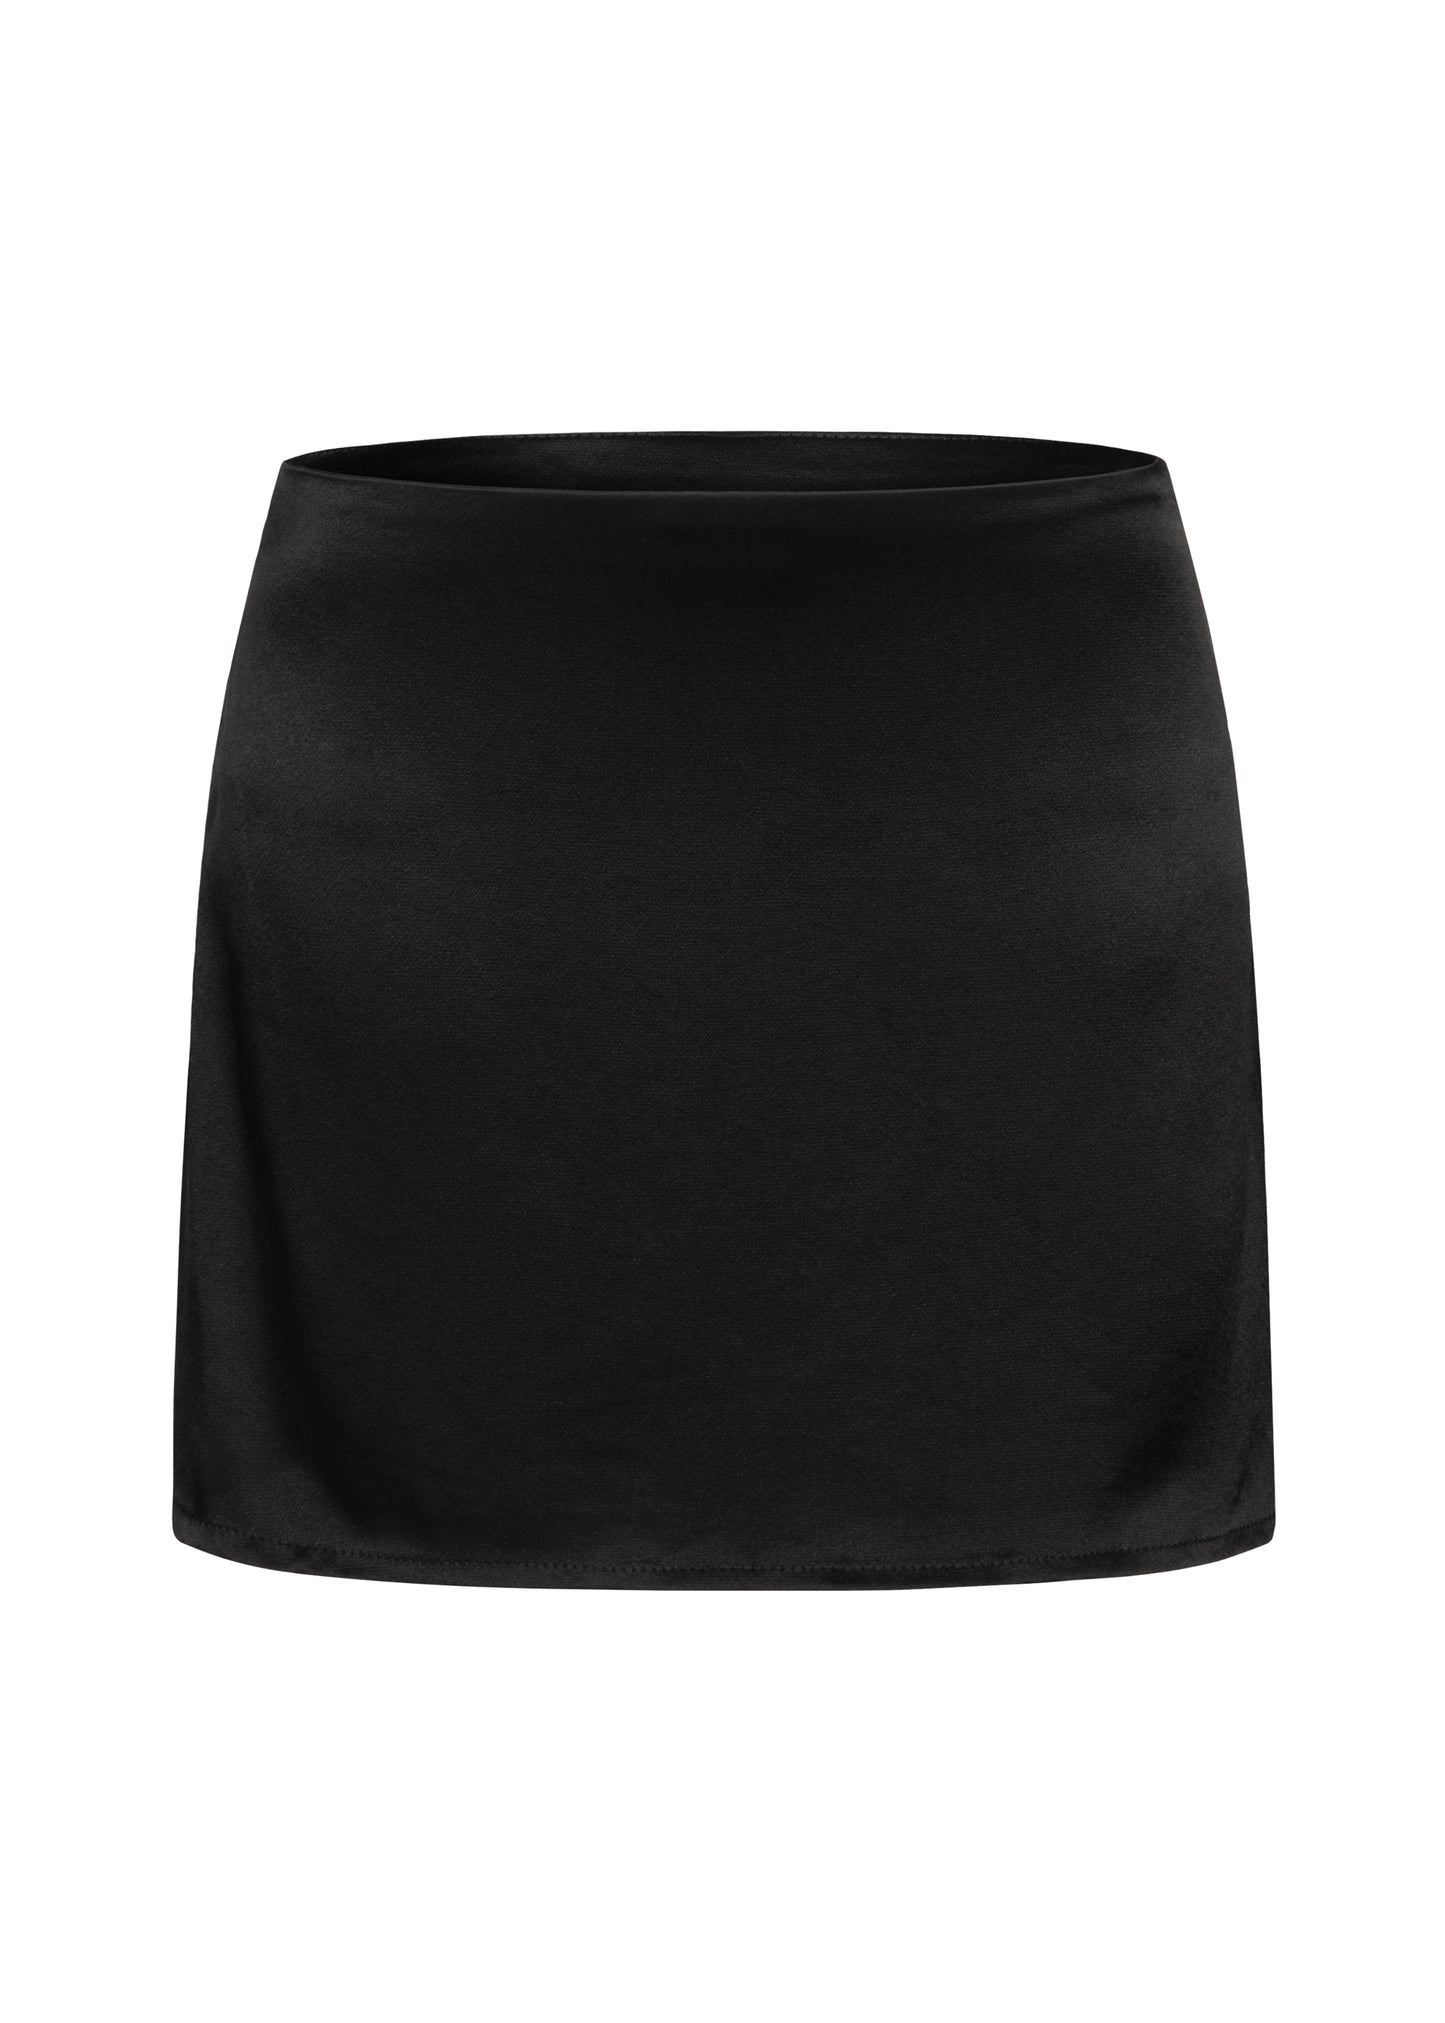 Viscose low-waist silky skirt in black color from FORMA.